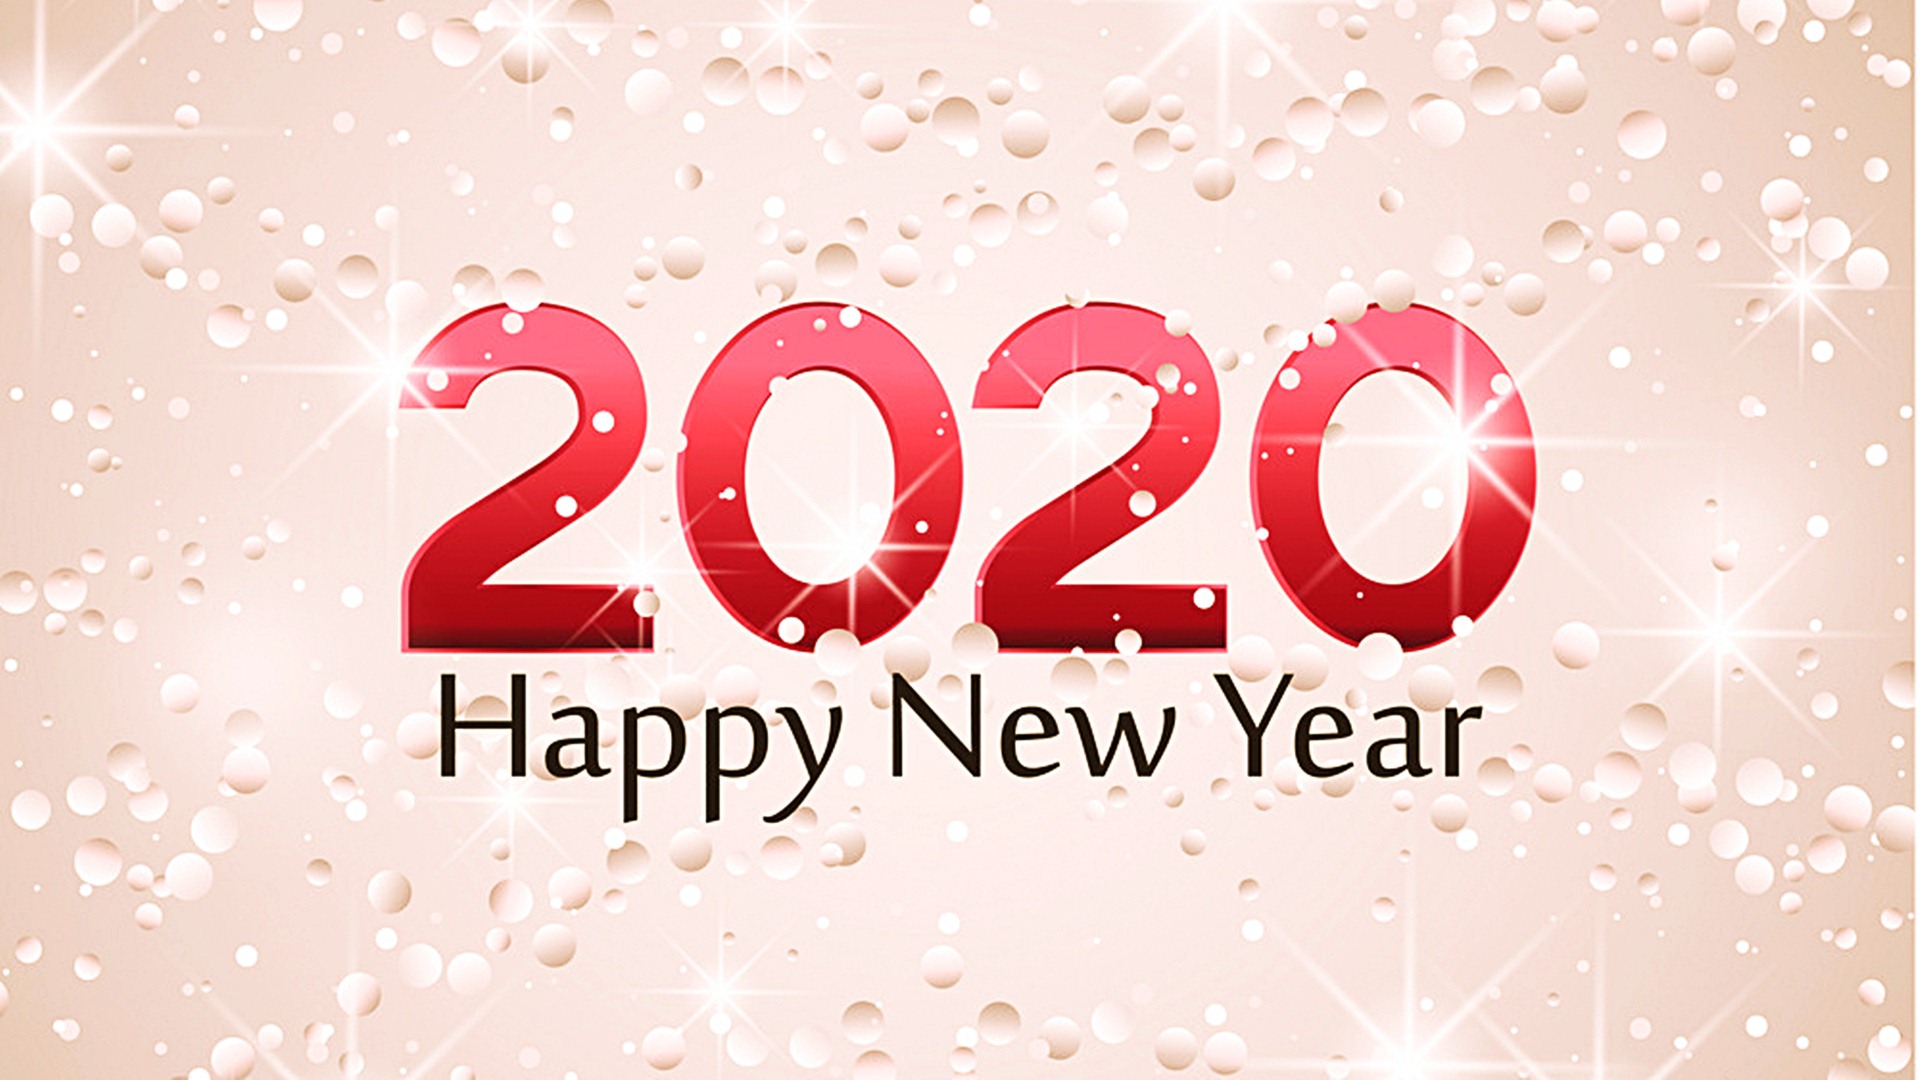 Happy New Year Wishes Message Quotes Wallapers Gifs Greetings